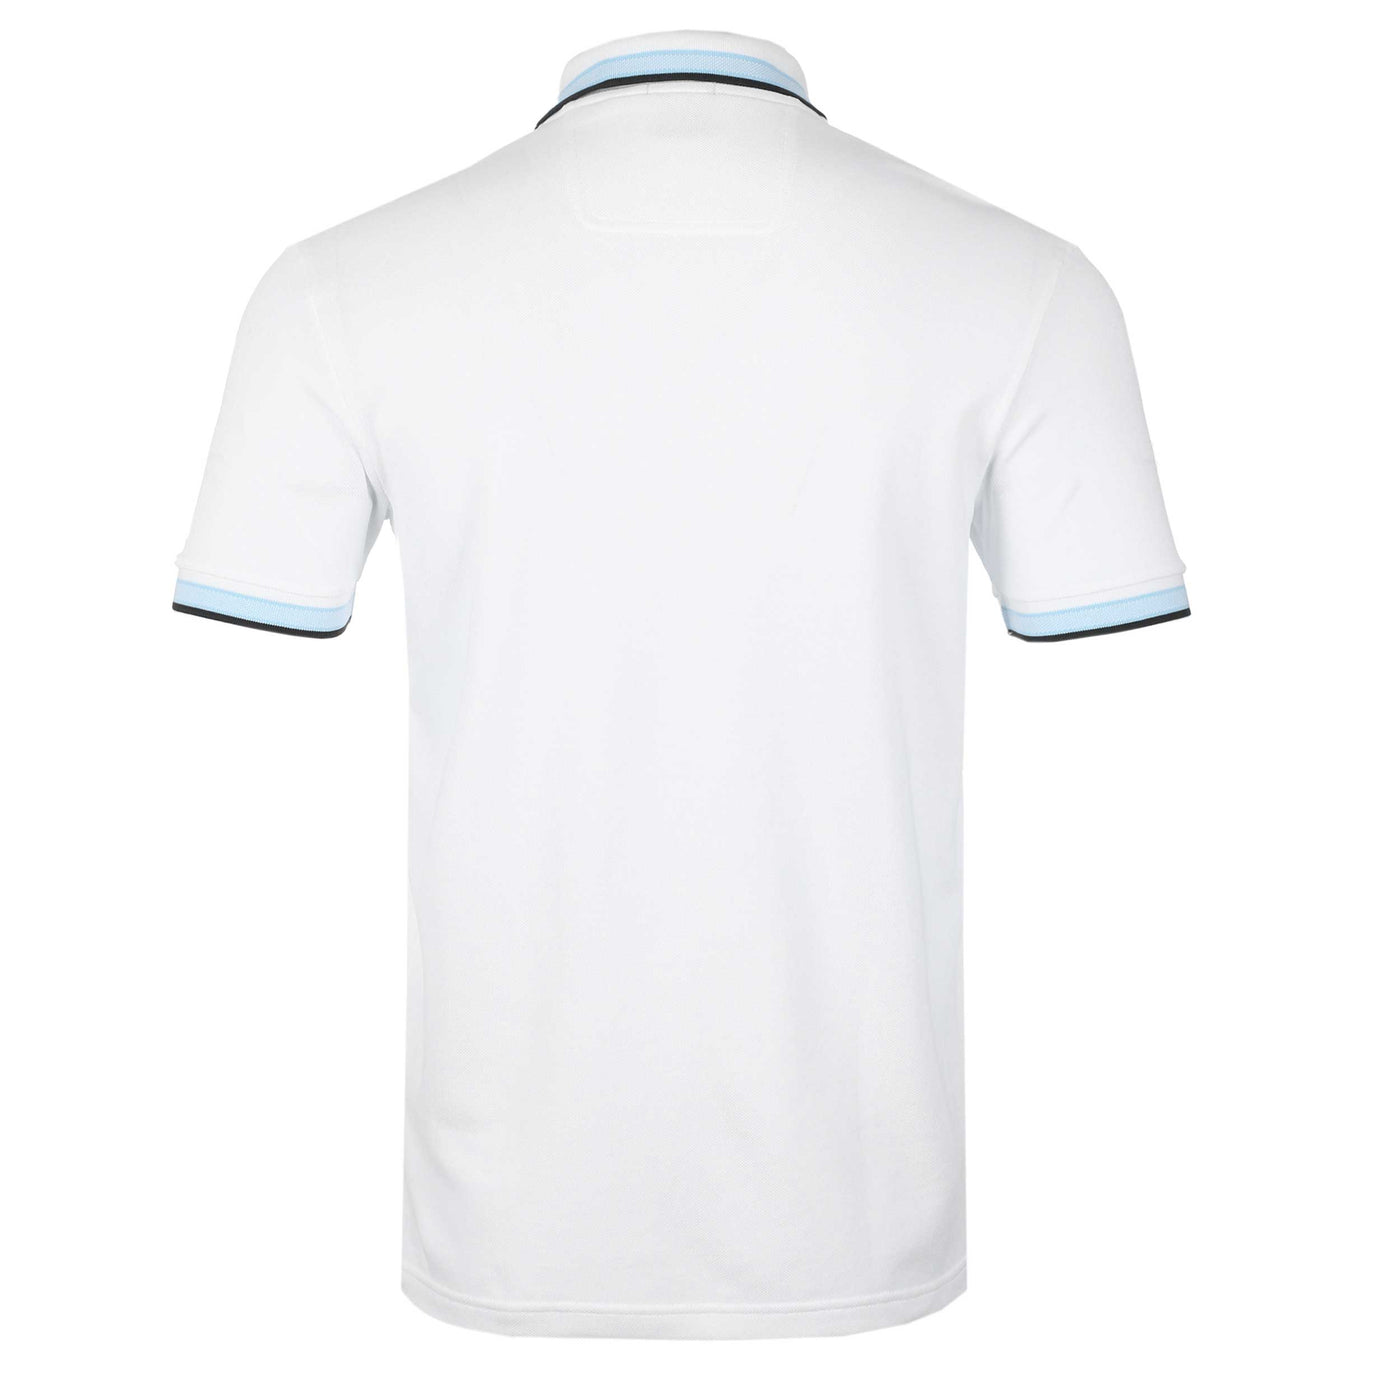 BOSS Paddy Polo Shirt in White